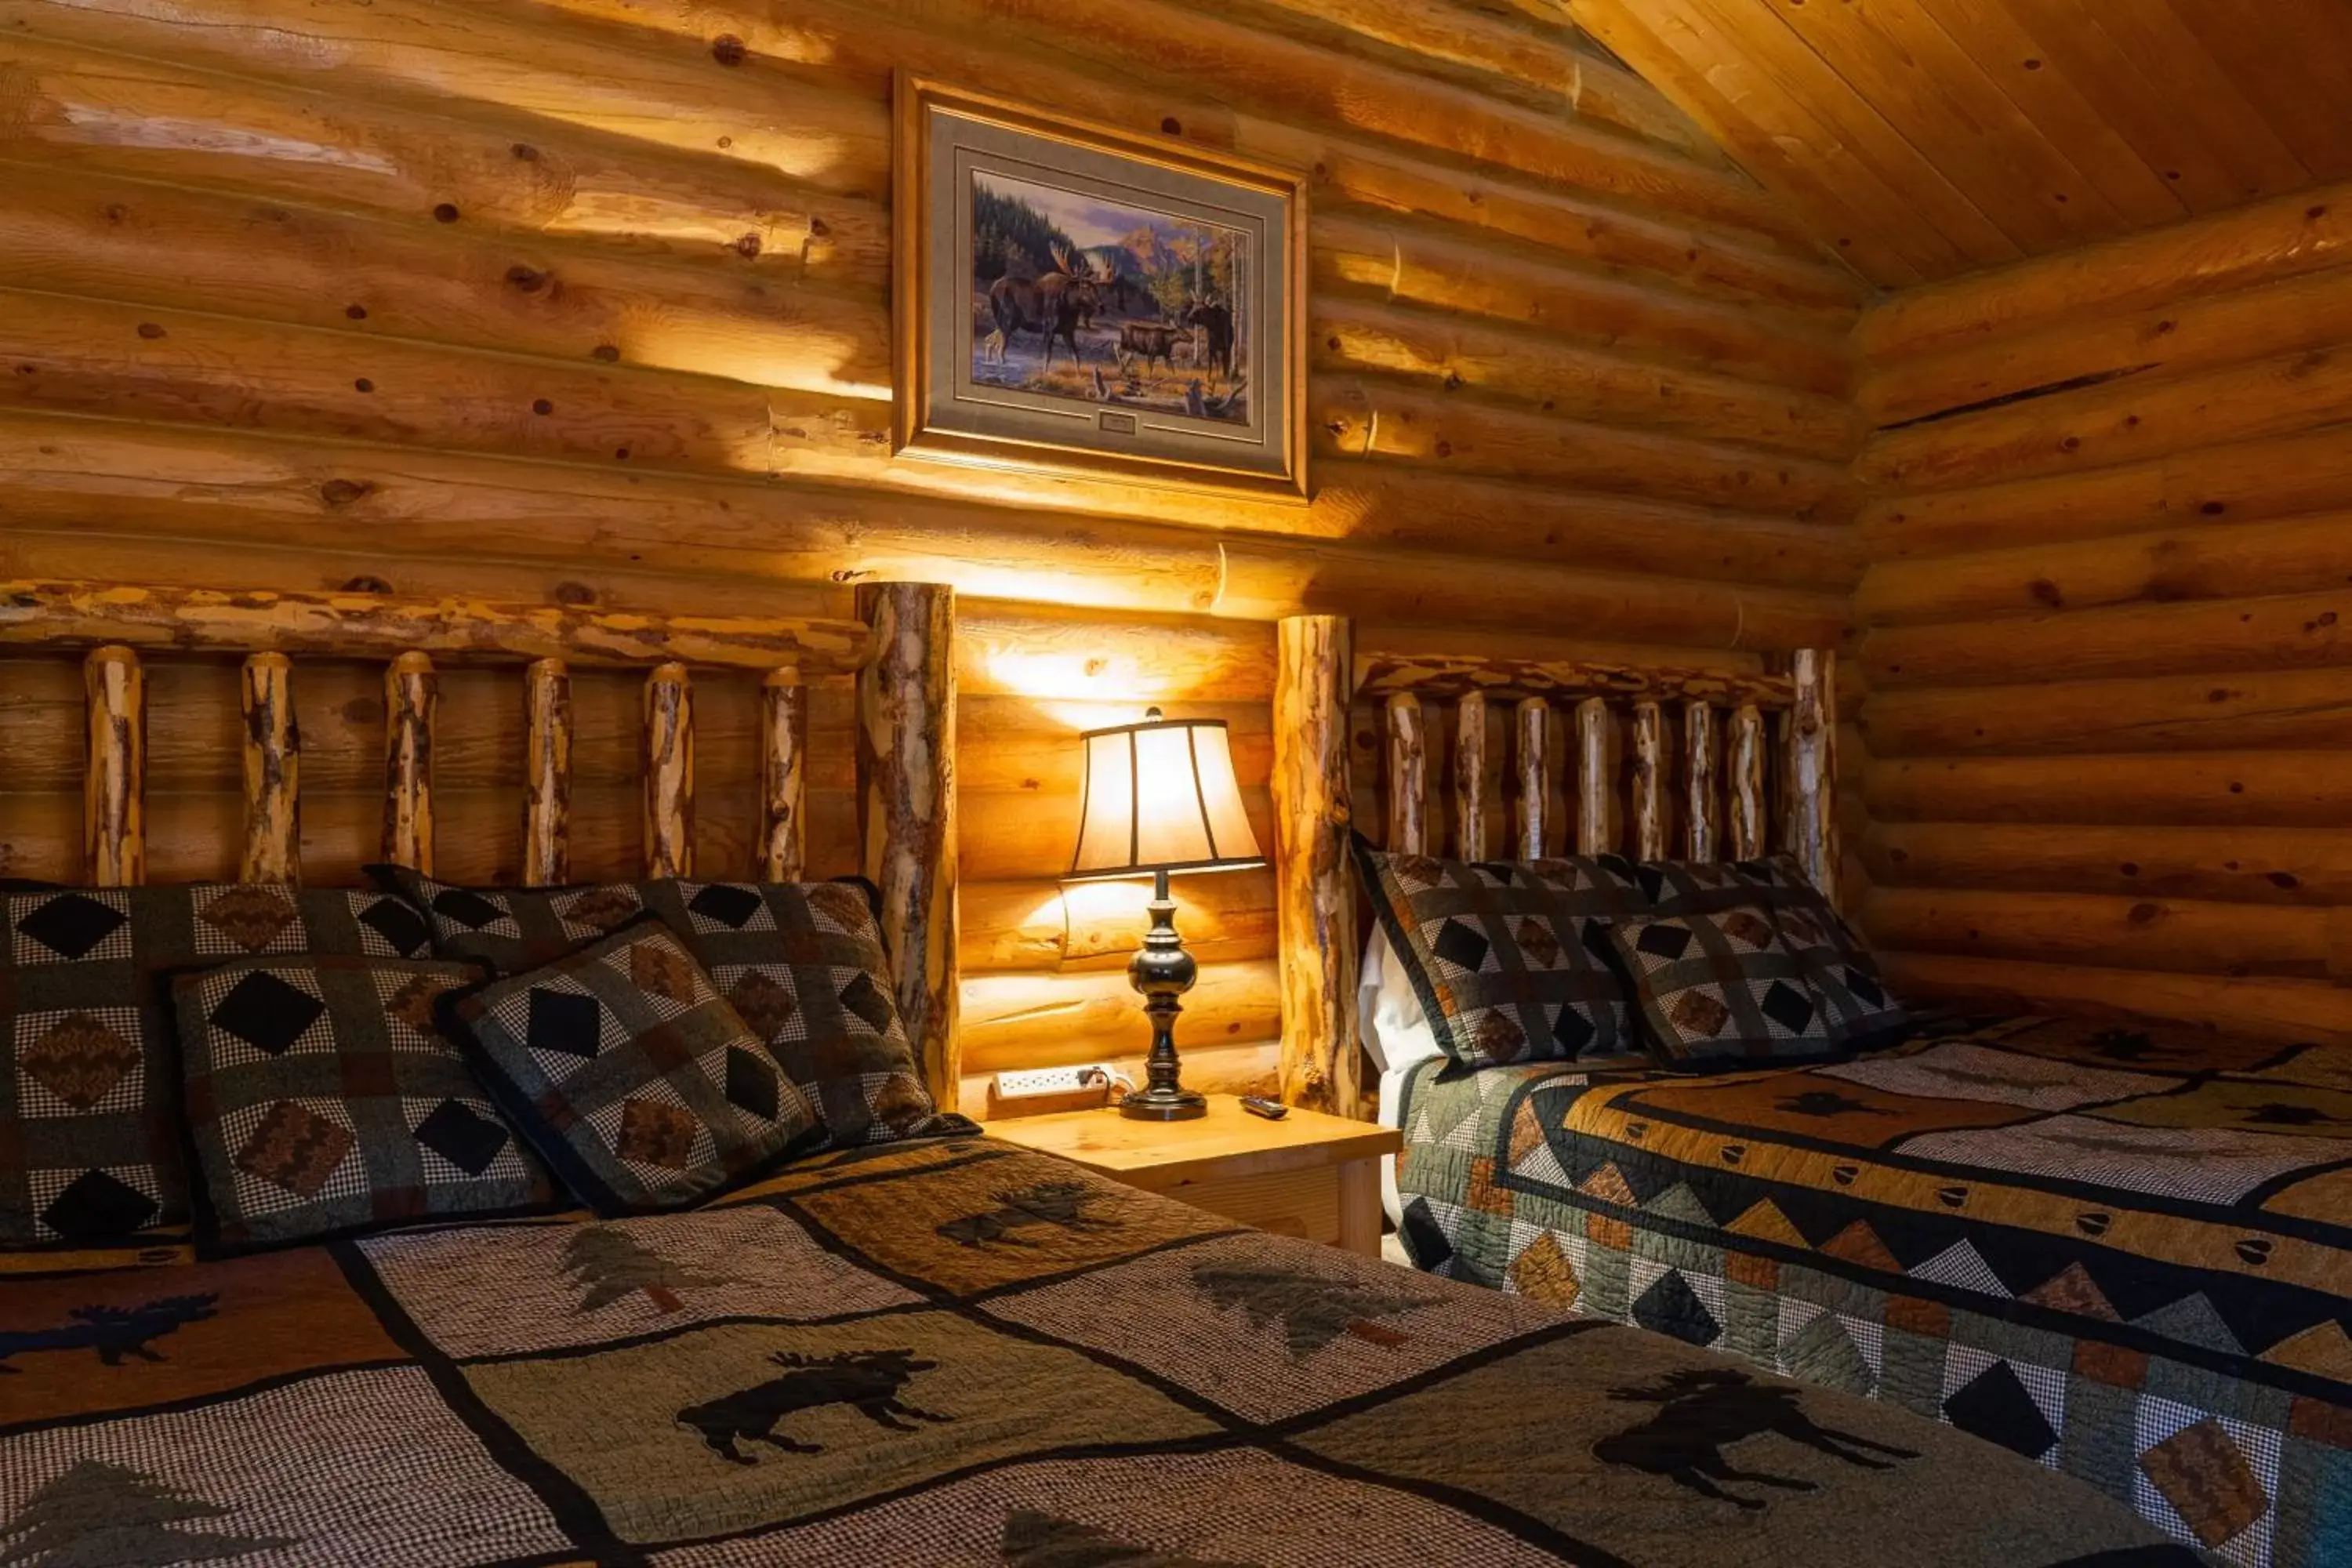 Bed in Country Cabins Inn